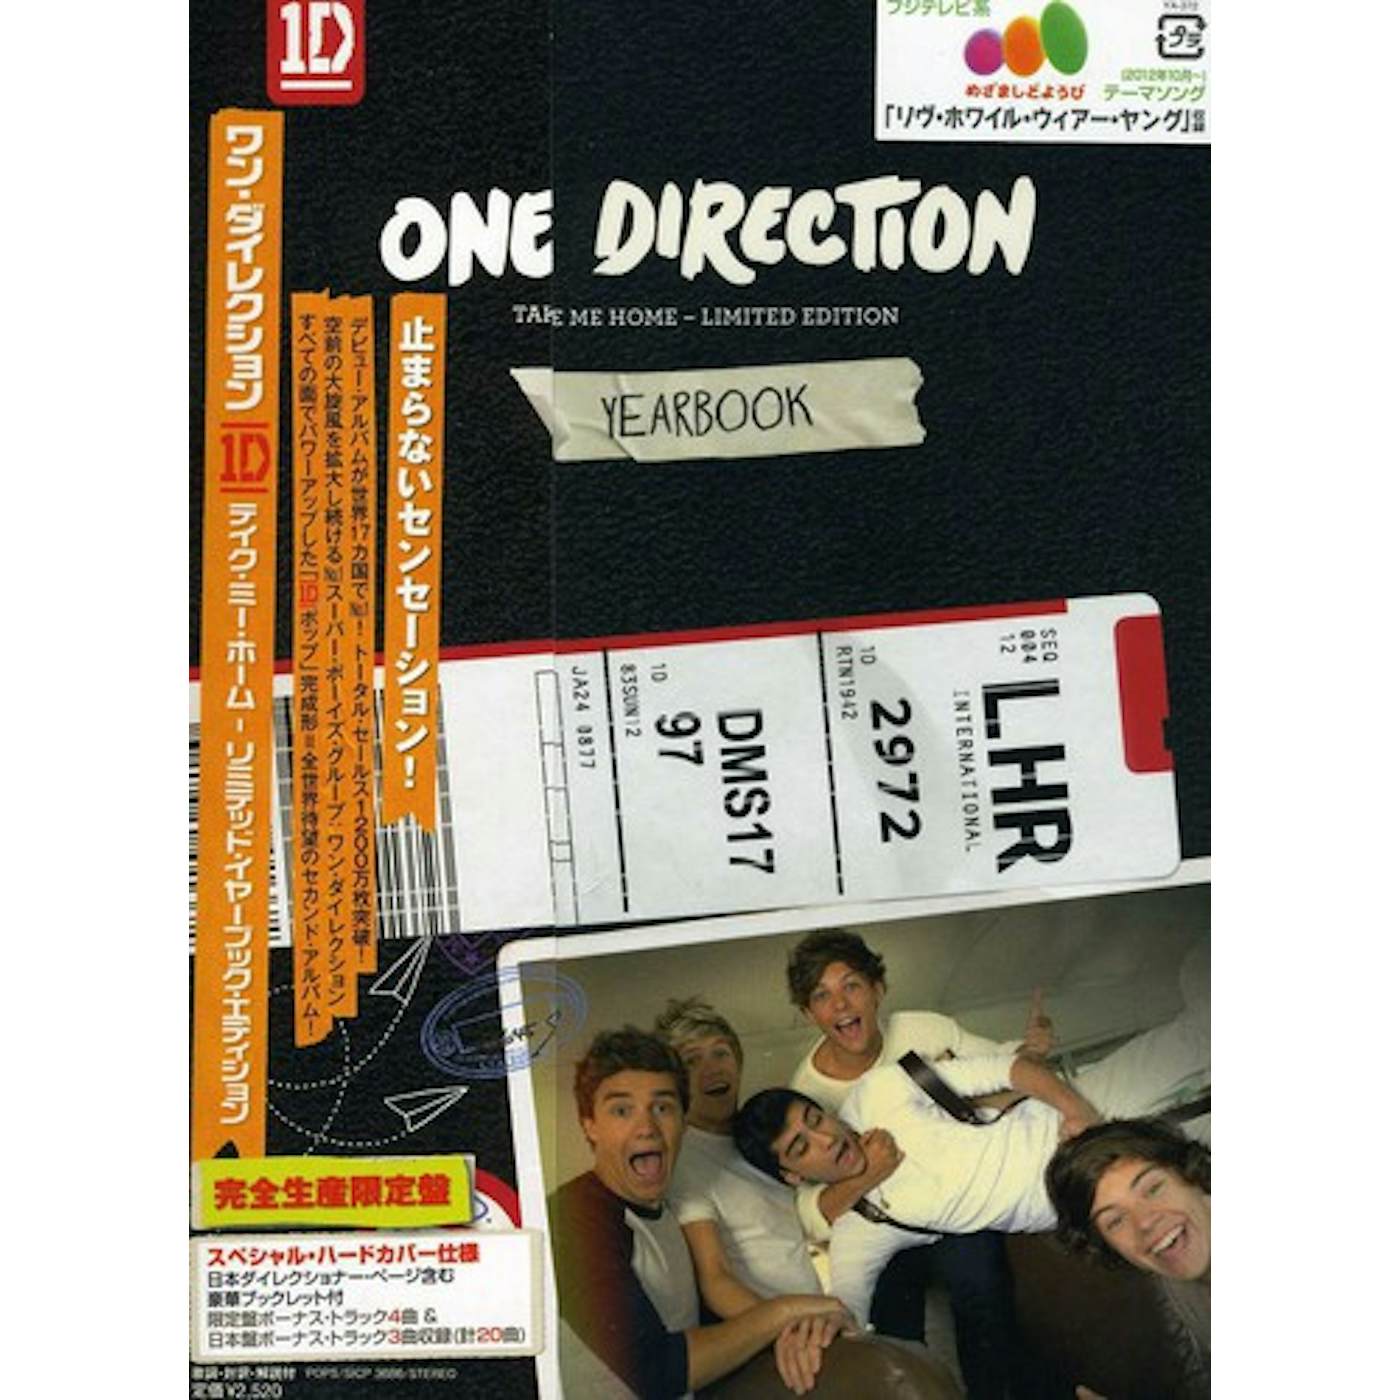 One Direction TAKE ME HOME - LIMITED EDITIONOOK CD